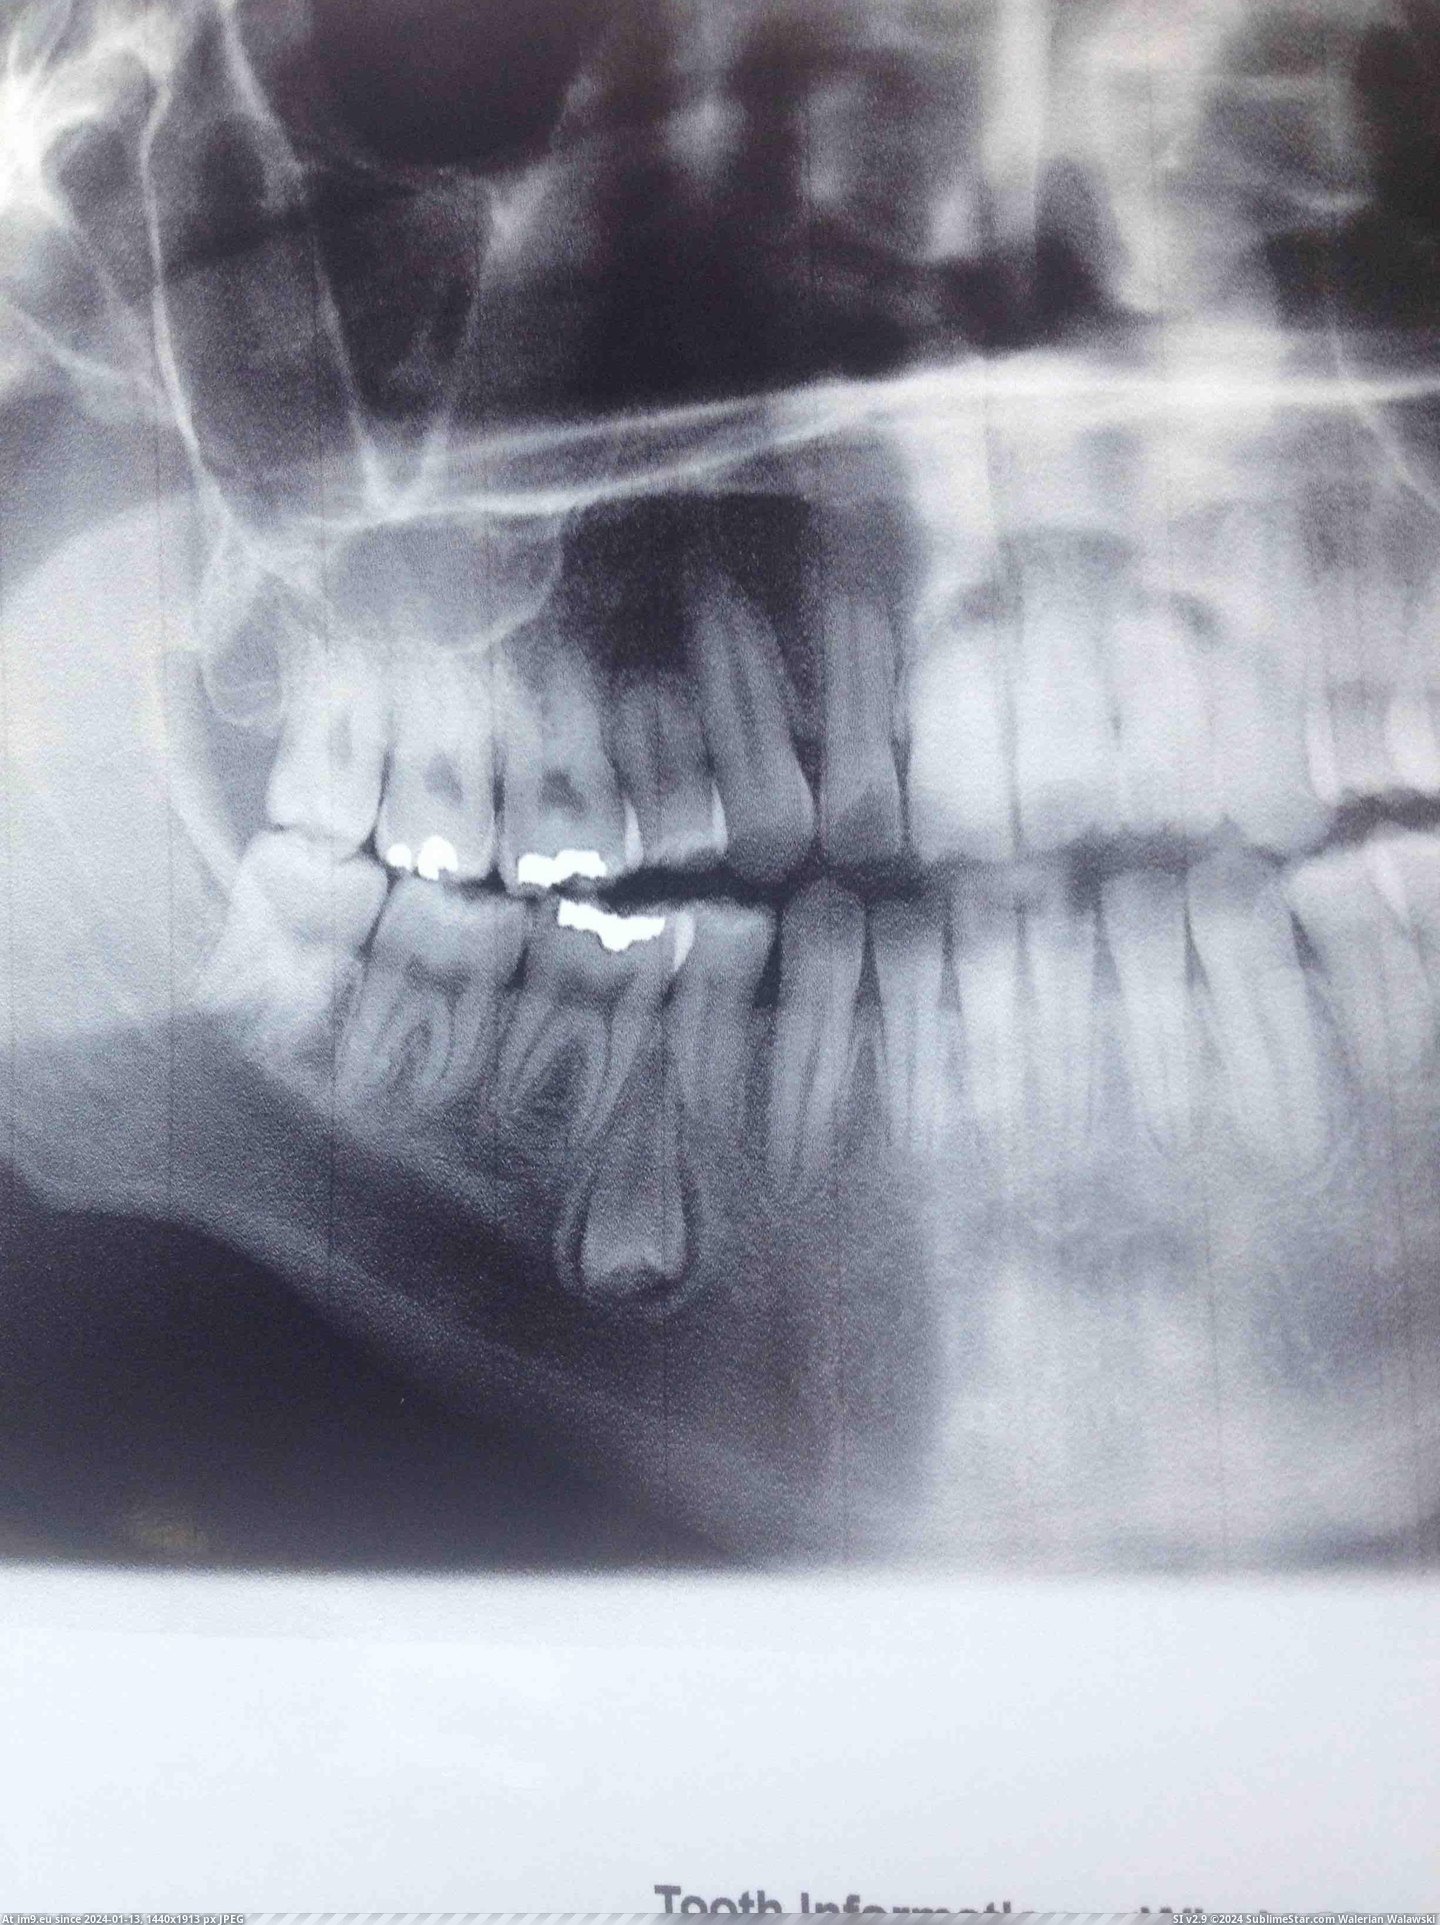 #Wtf #Growing #Tooth #Dentist #Gums #Upside #Discovered [Wtf] Went to the Dentist yesterday, they discovered a tooth growing upside down in my gums. Pic. (Изображение из альбом My r/WTF favs))